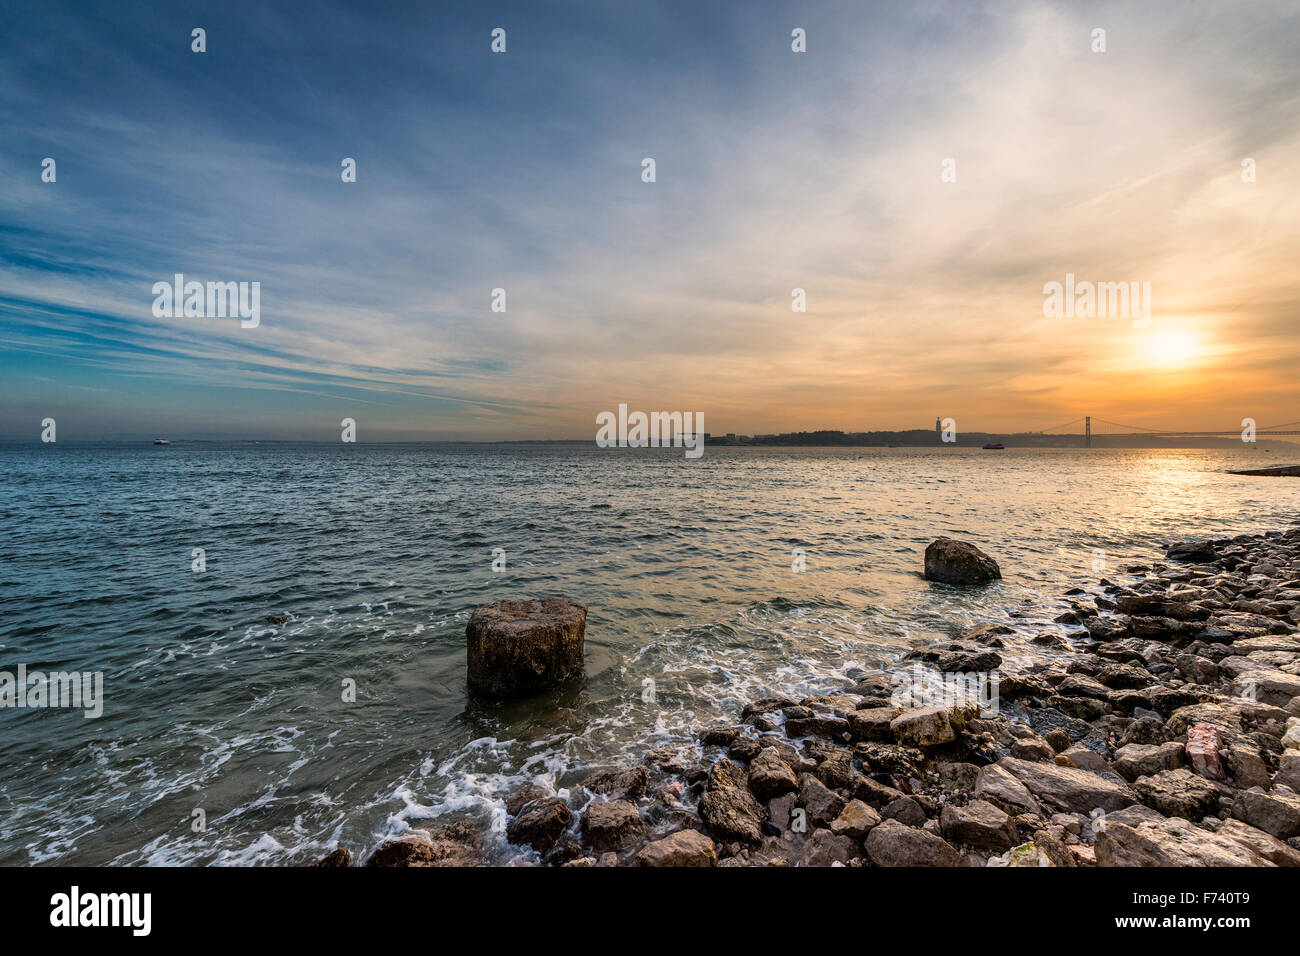 View of the River Tagus in Lisbon, Portugal Stock Photo